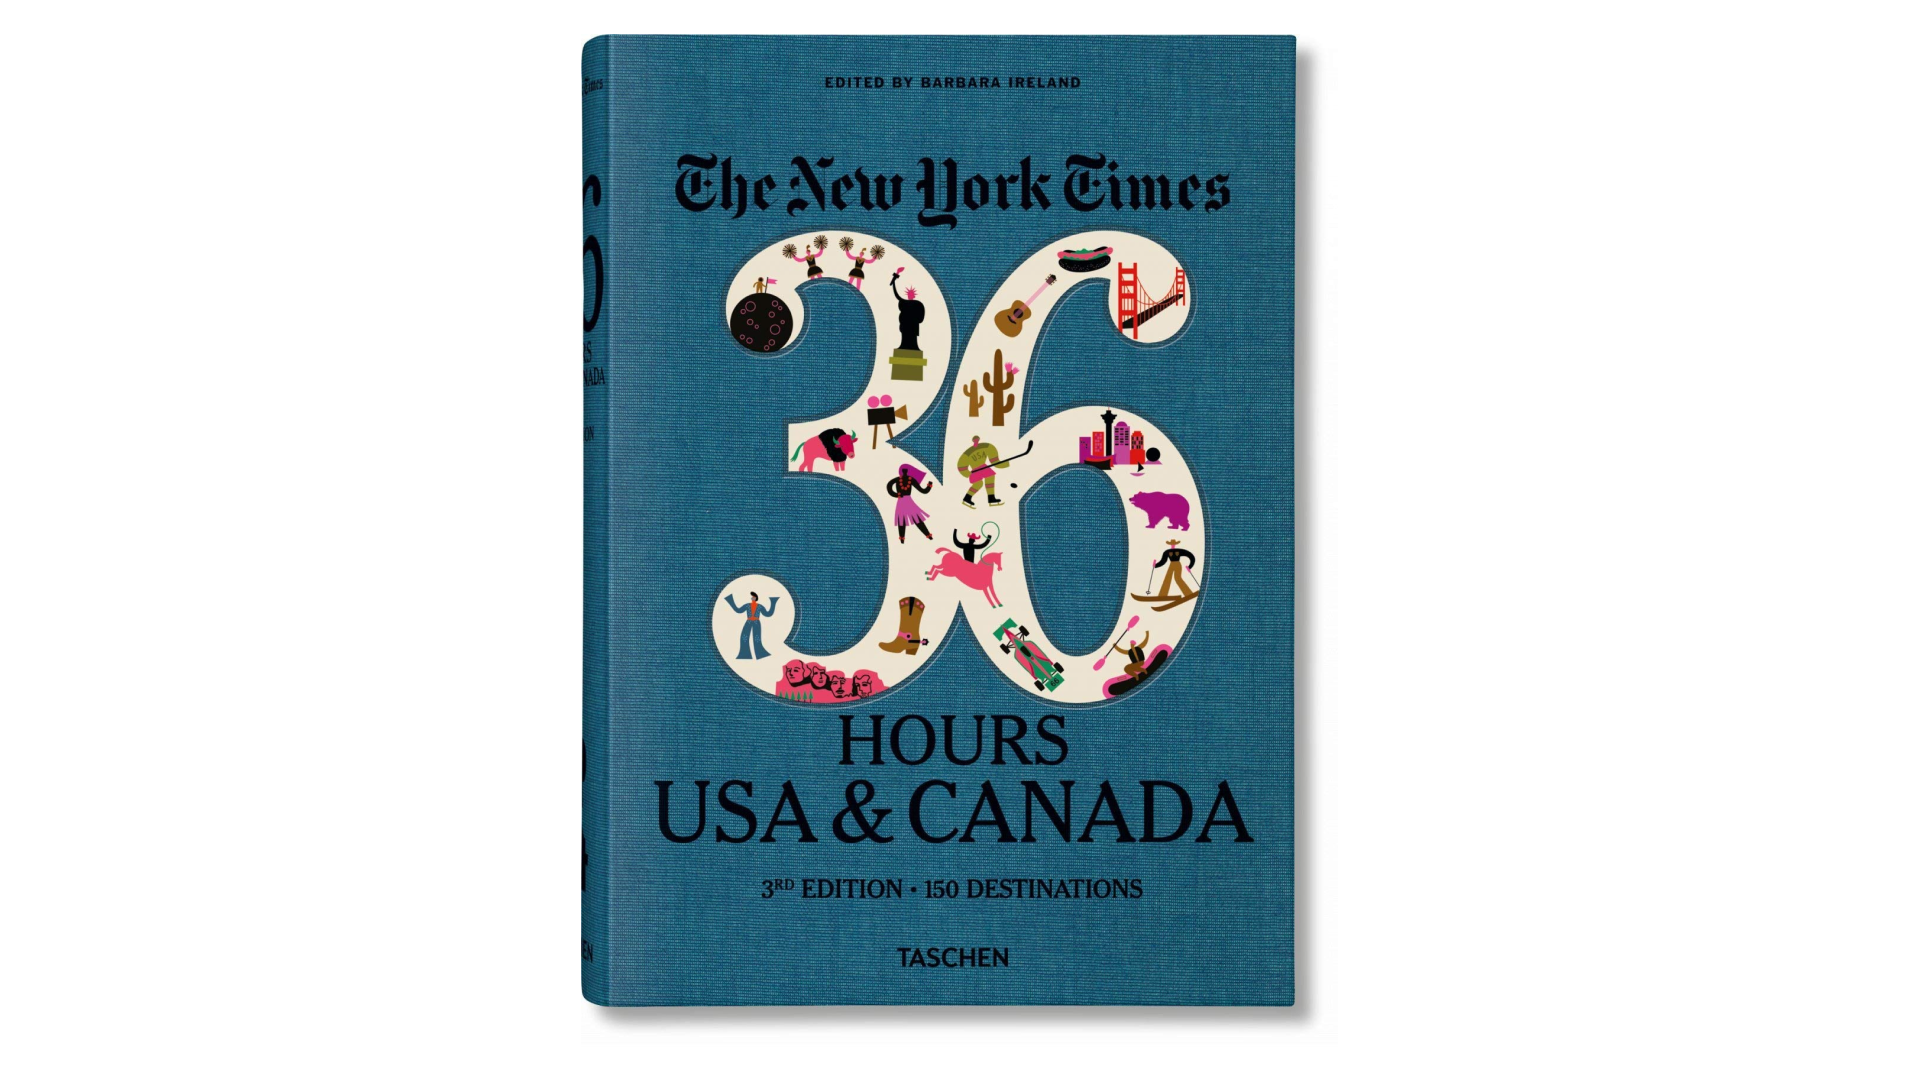 36 hours travel book